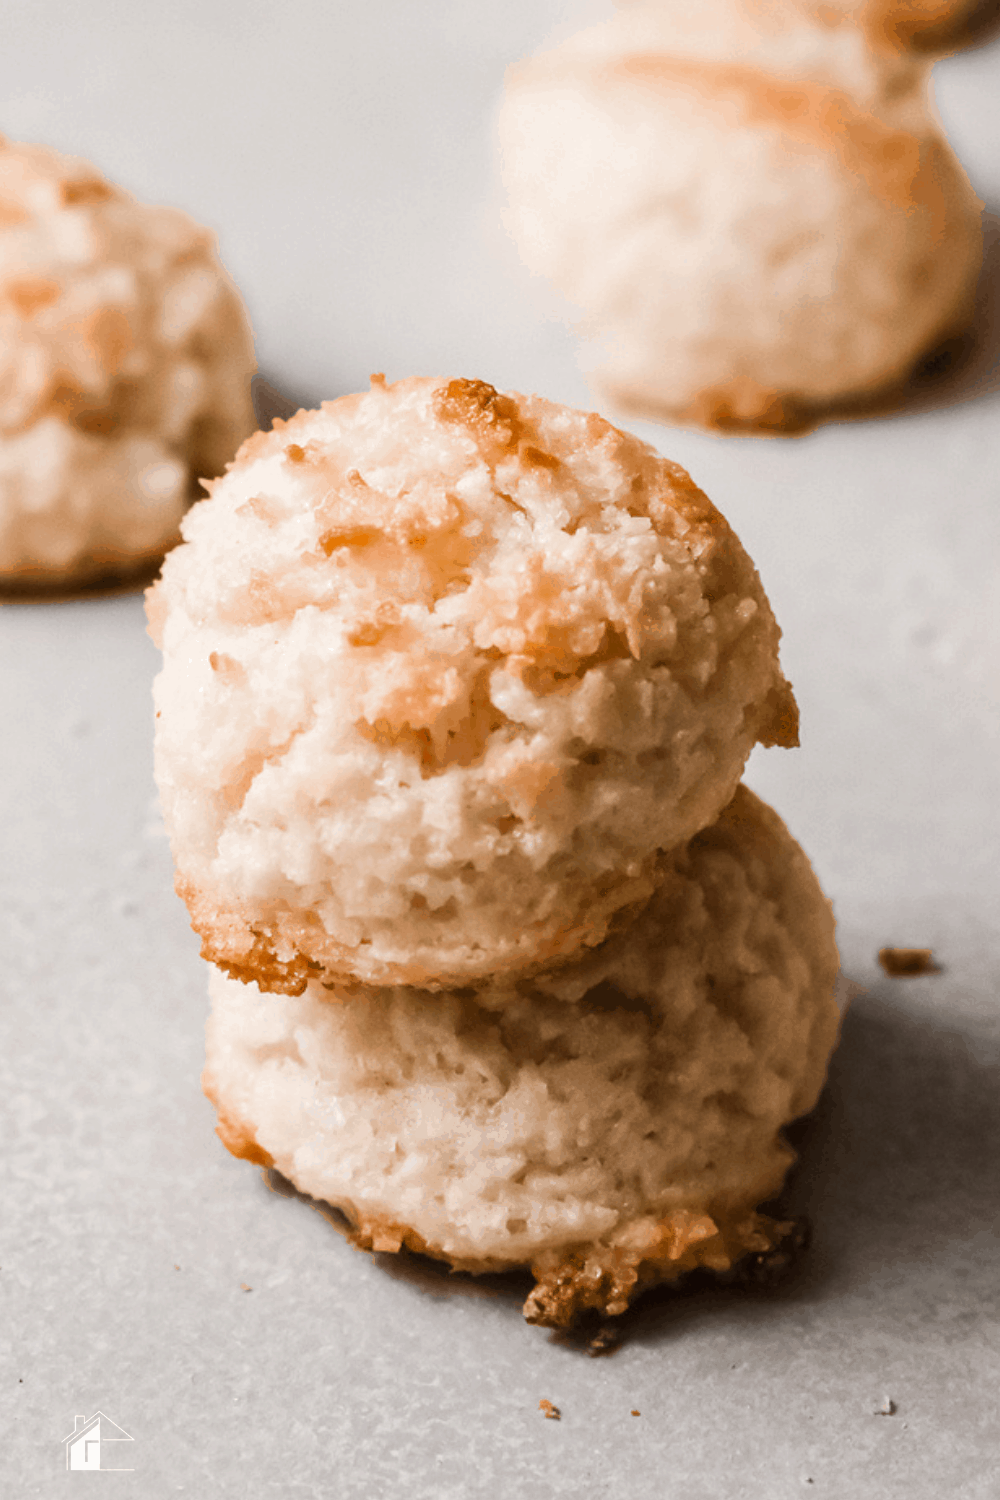 Simple yet so delicious, Besitos de Coco or Coconut Macaroons is a great treat to enjoy. Made with 3 ingredients and ready to eat in less than 20 minutes. #puertoricanfood #puertoricandessert #coconutmacaroons #dessert via @mystayathome